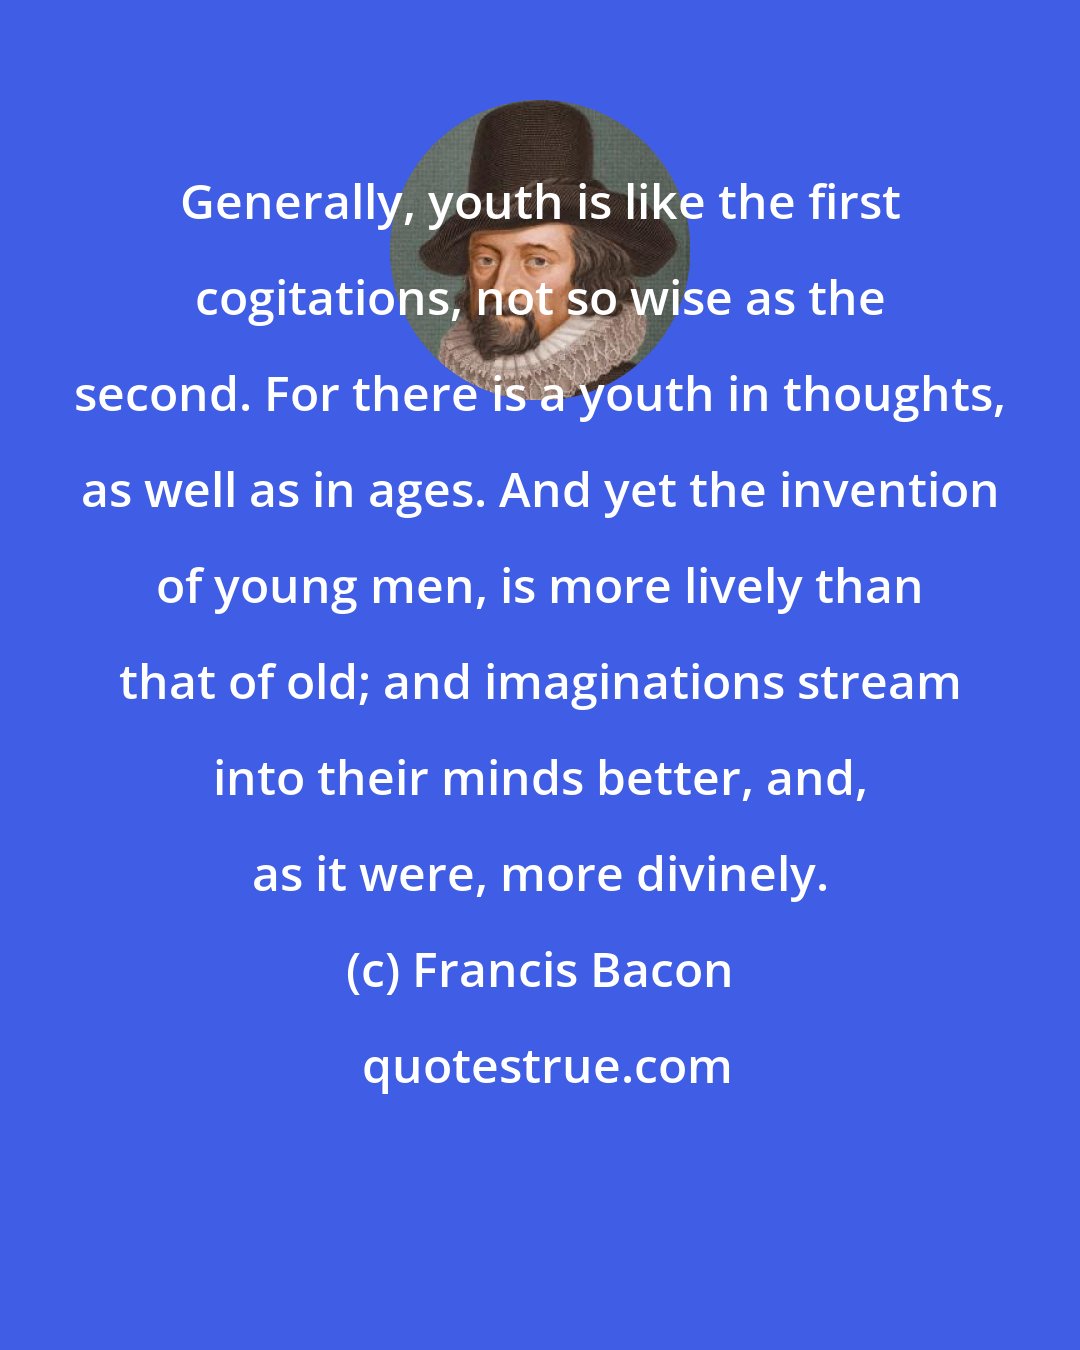 Francis Bacon: Generally, youth is like the first cogitations, not so wise as the second. For there is a youth in thoughts, as well as in ages. And yet the invention of young men, is more lively than that of old; and imaginations stream into their minds better, and, as it were, more divinely.